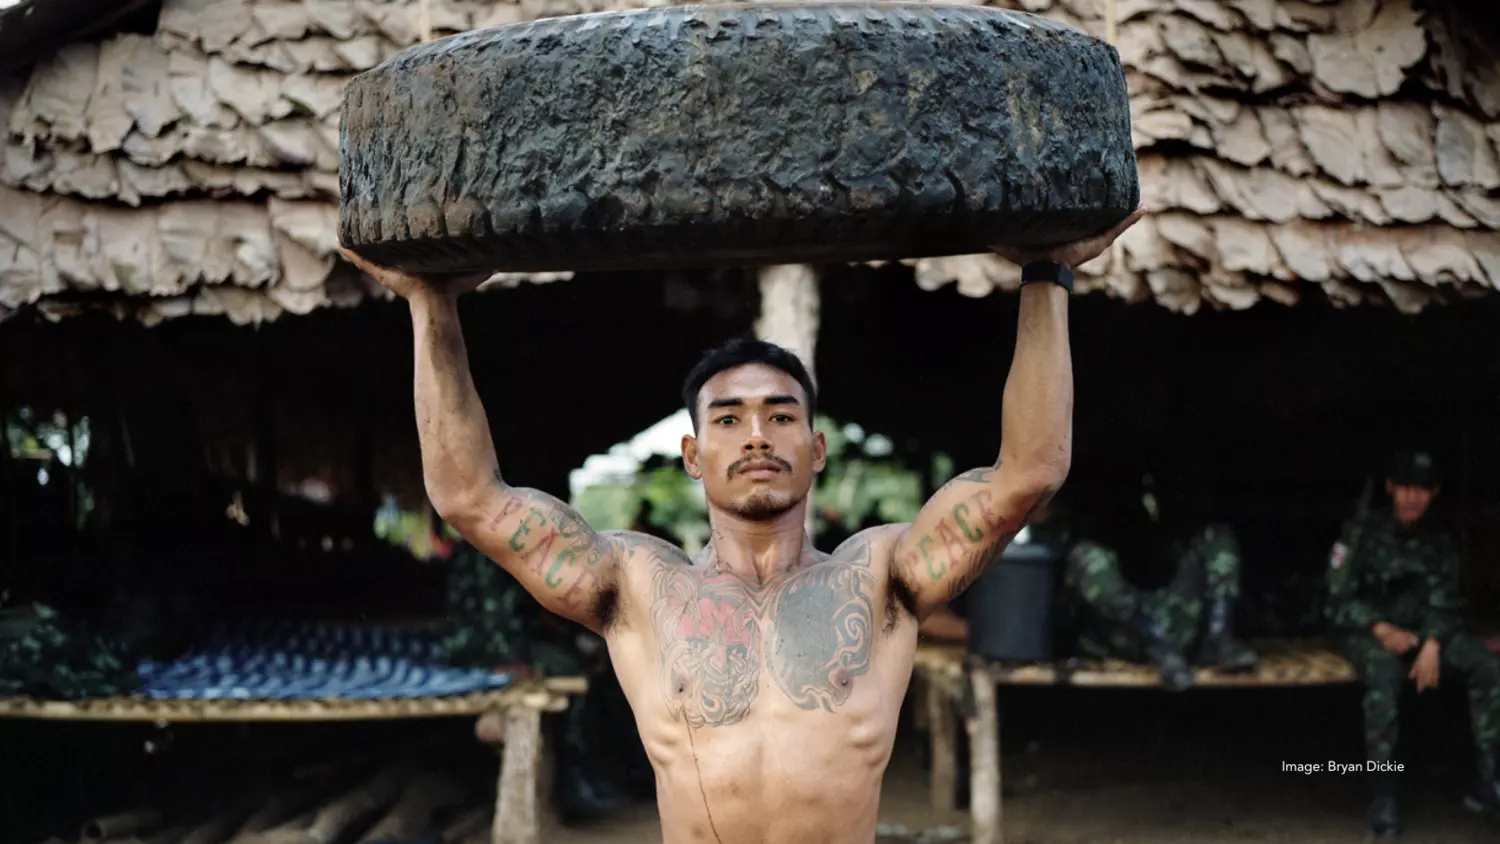 A tattooed Burmese man holds a boulder over his head while staring stoically at the viewer. The tattoos on both his upper arms read "Peace"